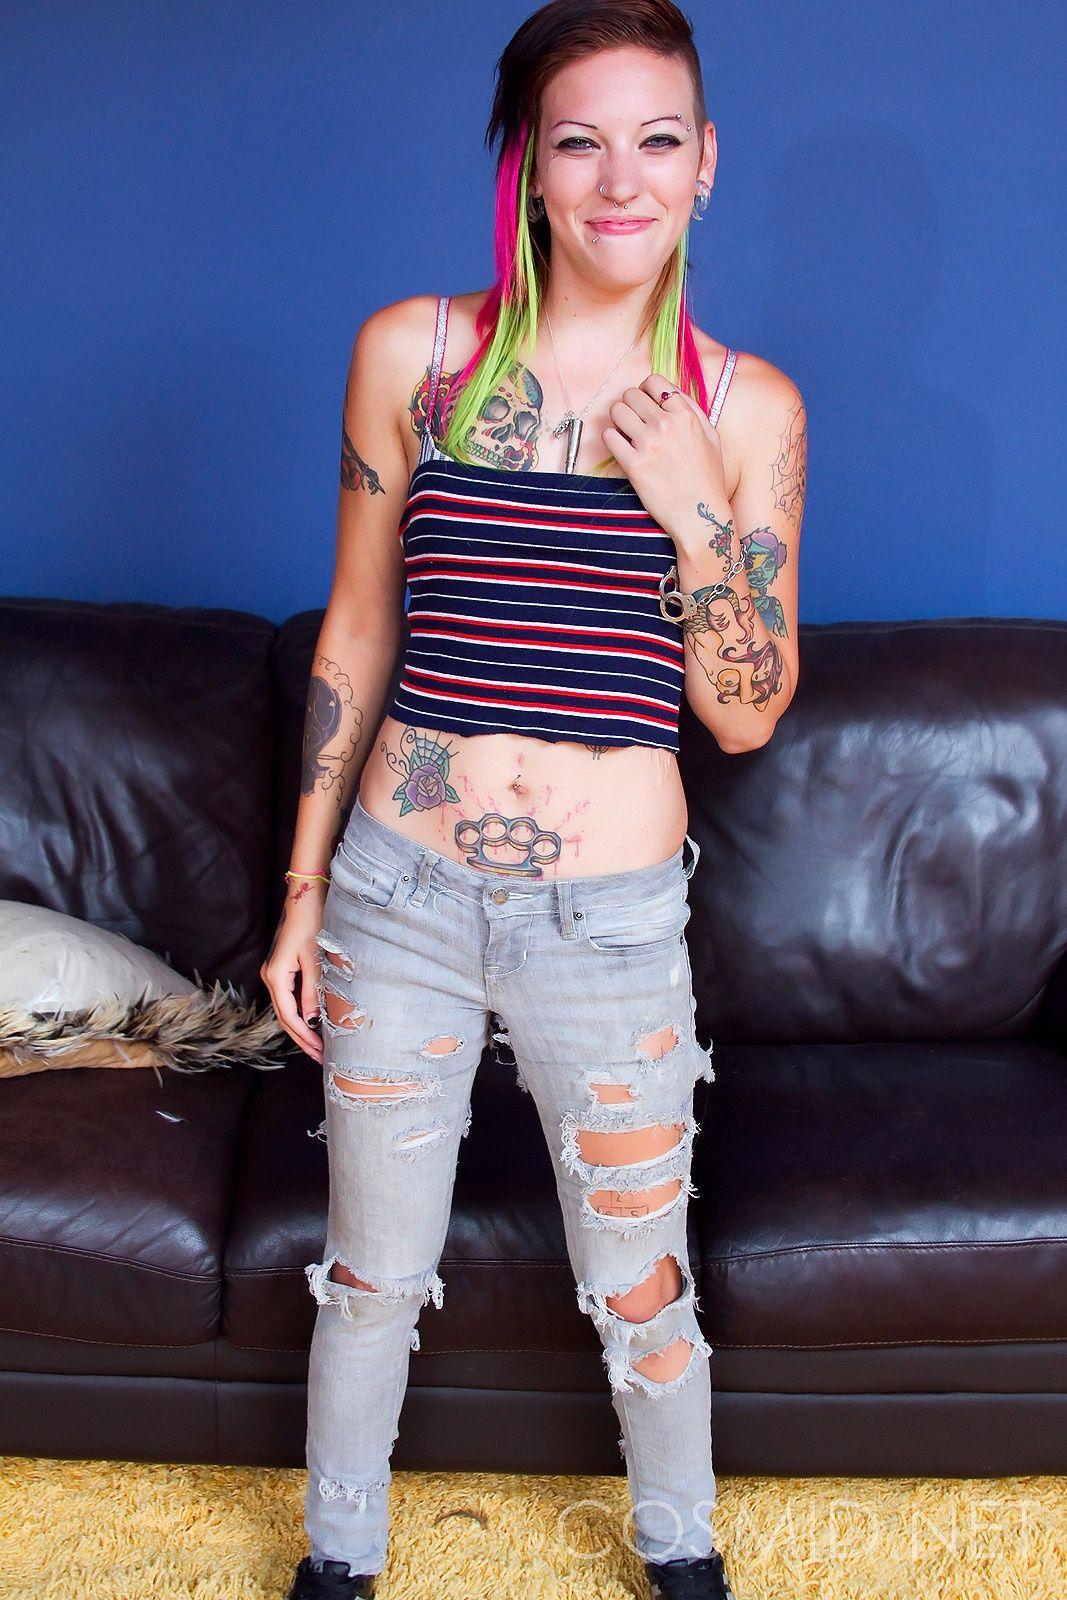 Pictures of a hot punk girl spreading her legs #60294366